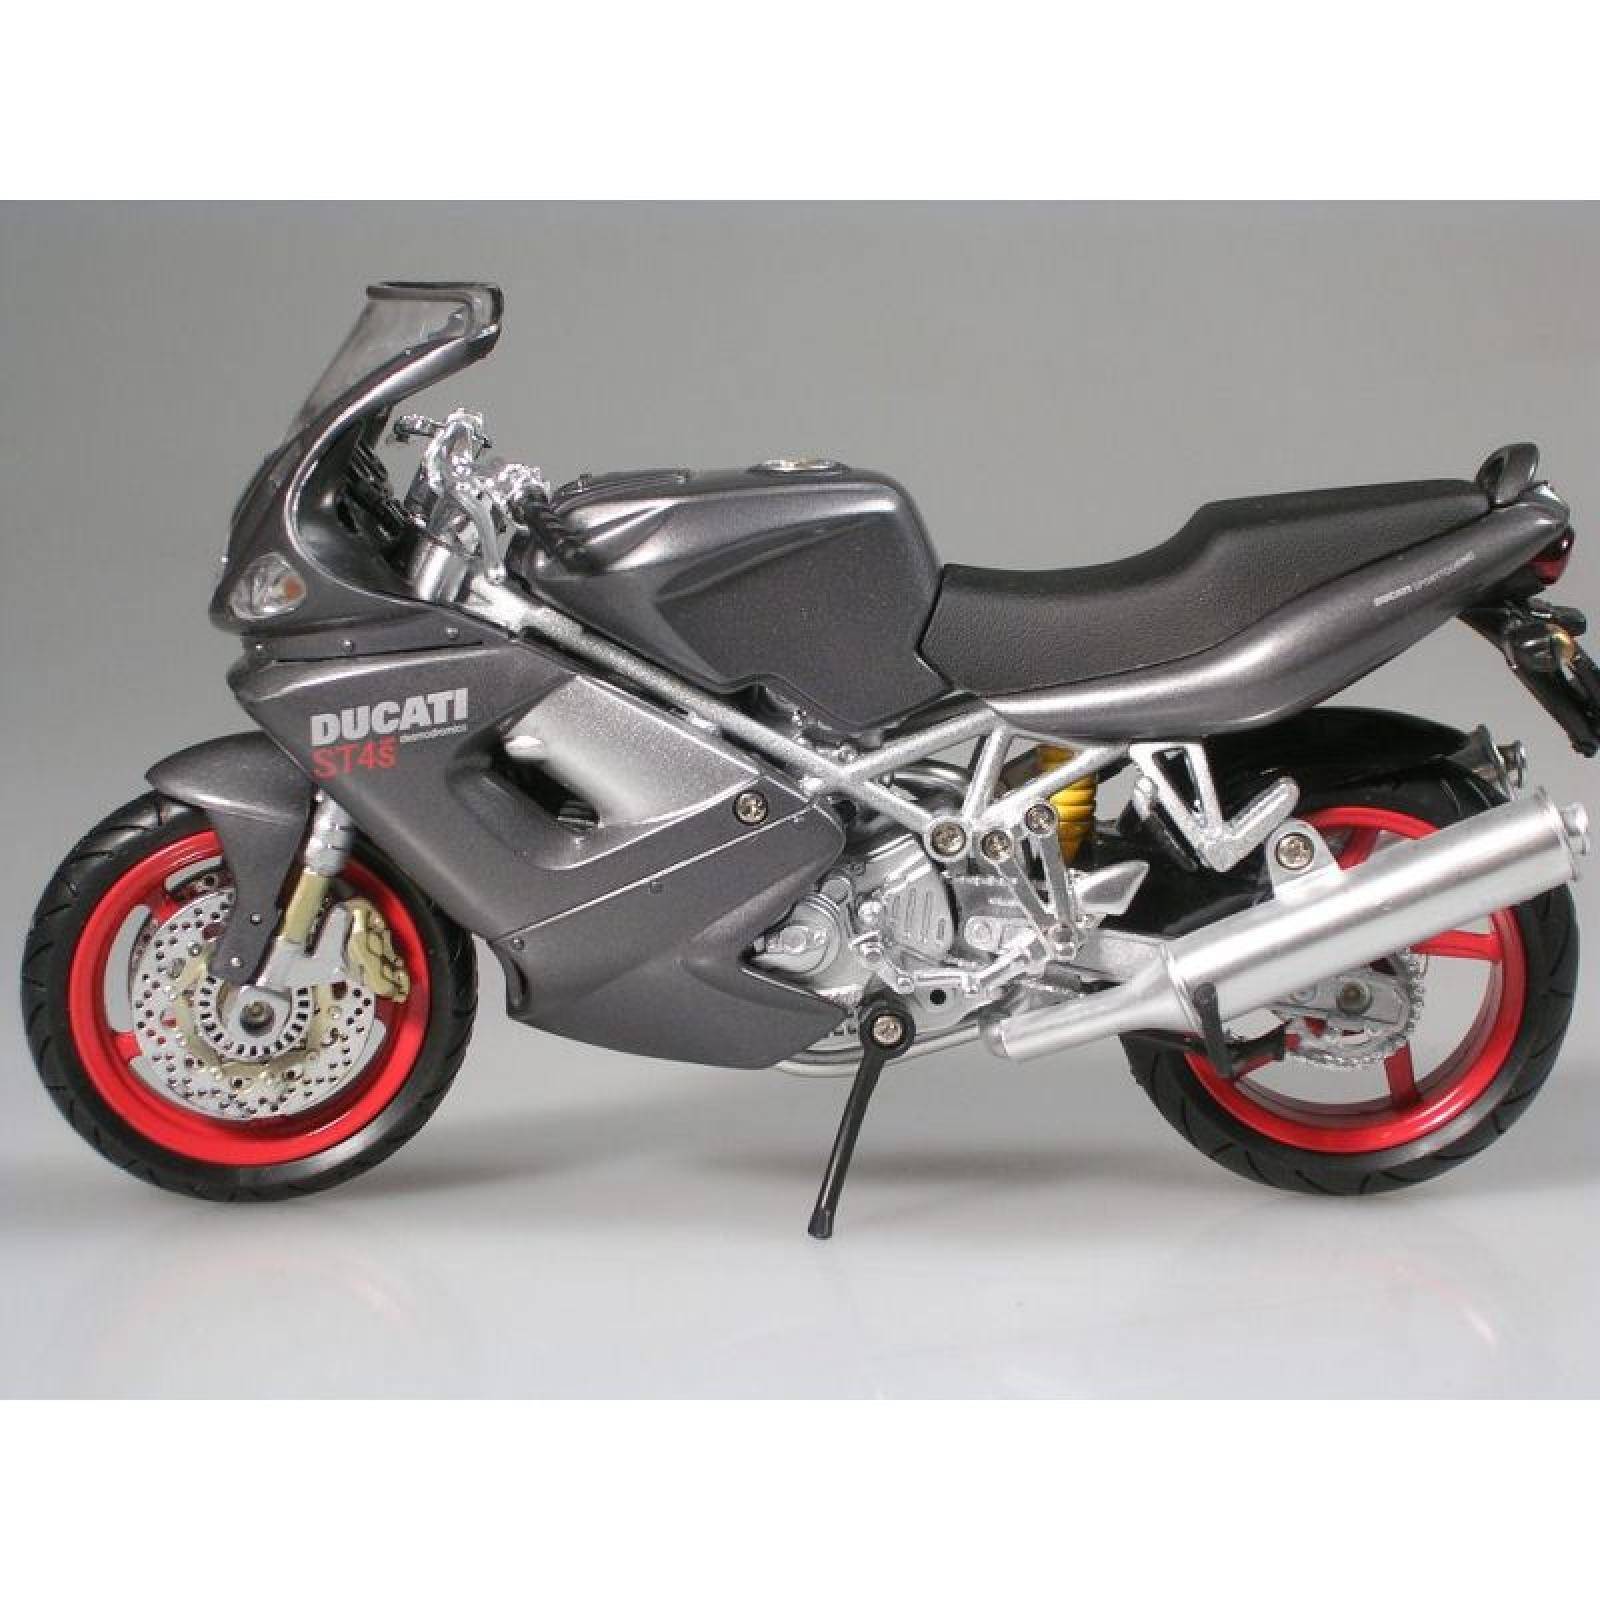 ▷ ducati st4s abs manual, ducati st4s abs motorcycle owner's manual | guidessimo.com